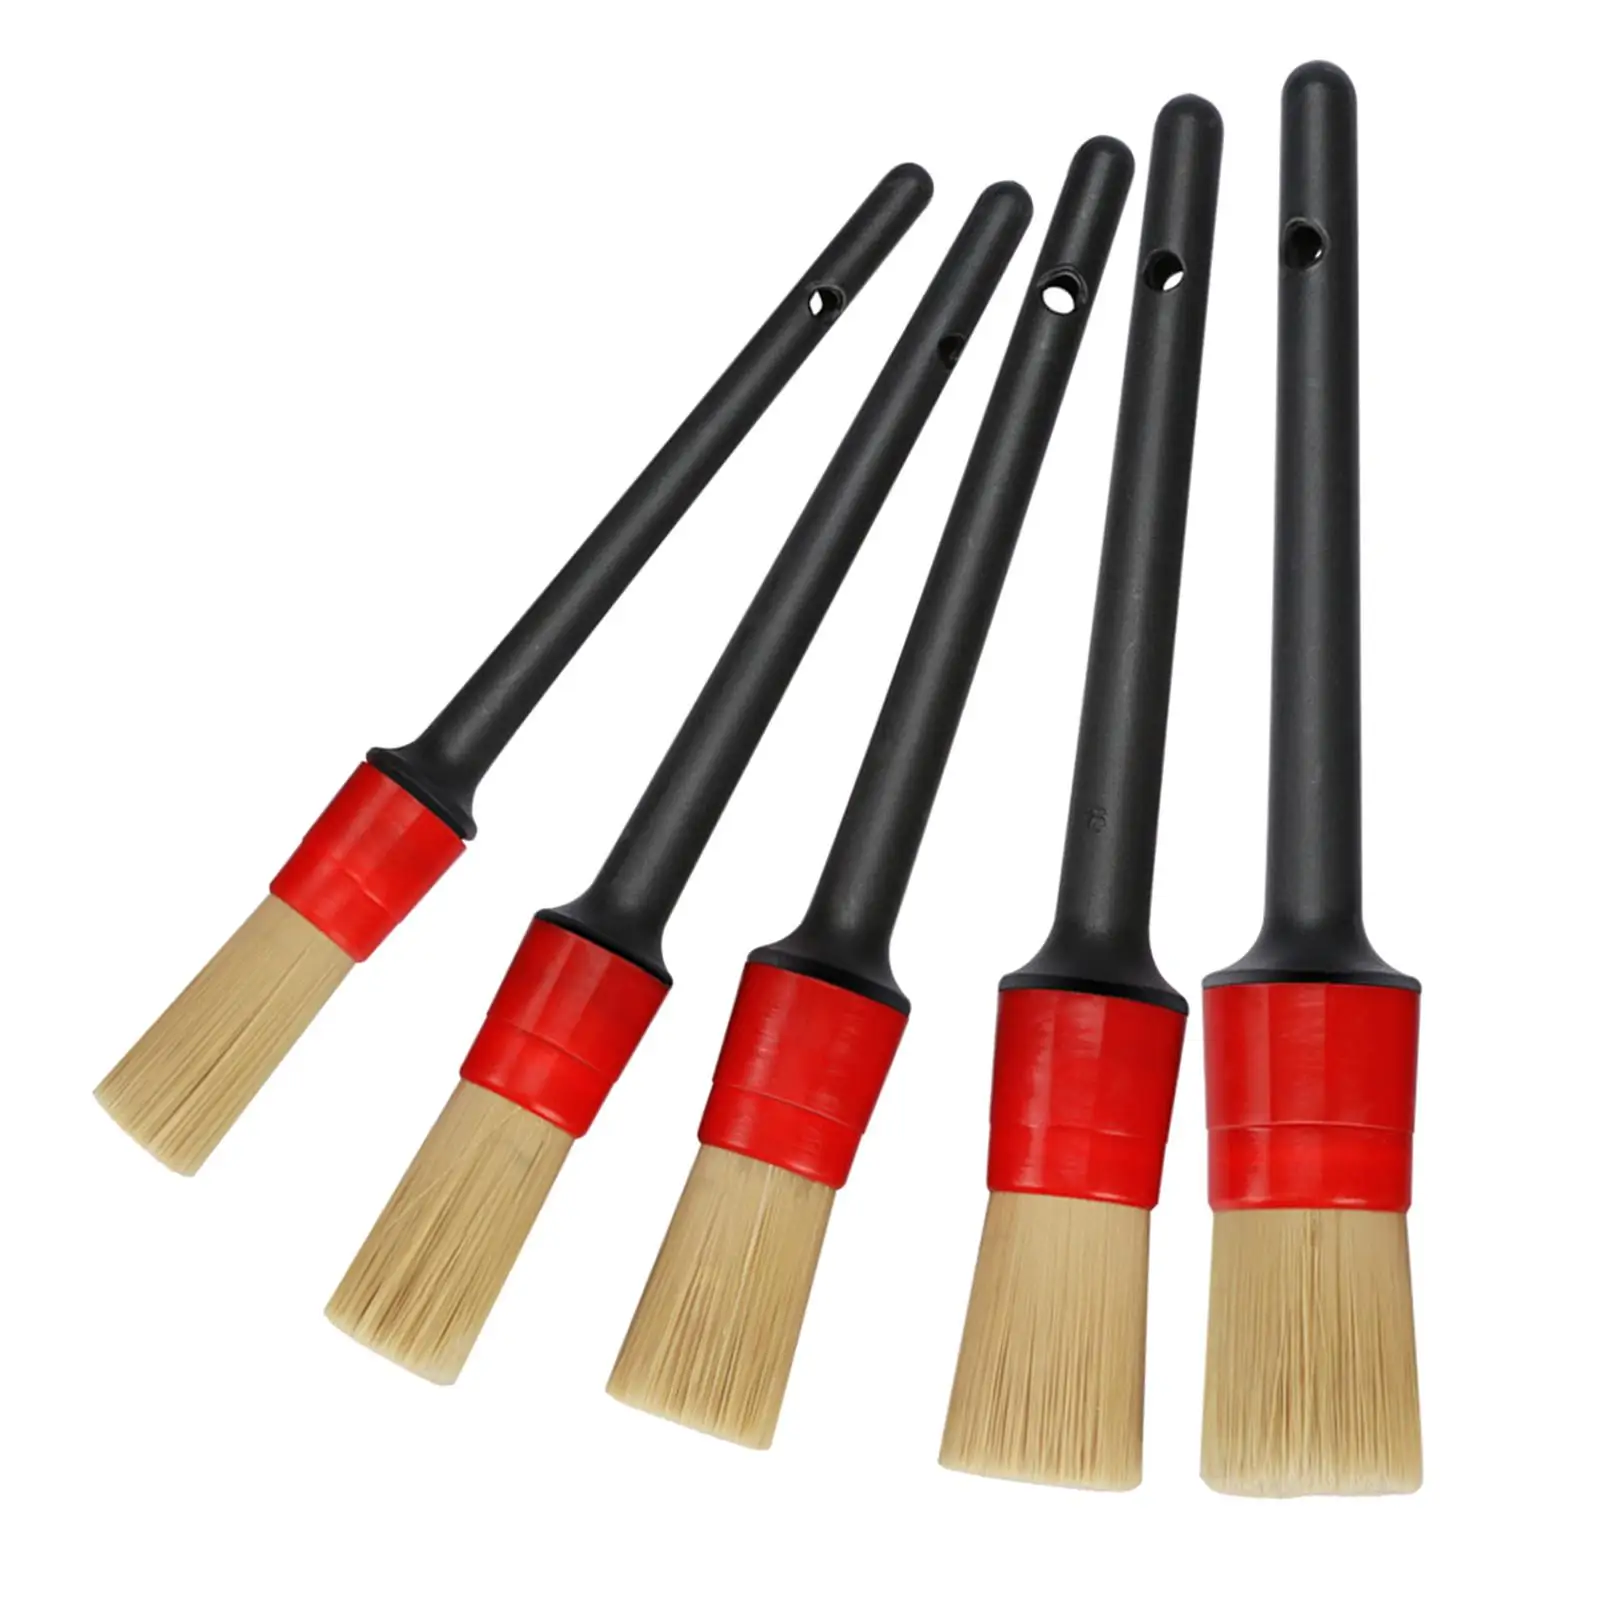 5x Detailing Brush Set for Cleaning Engine Dashboard Car,Motorcycle